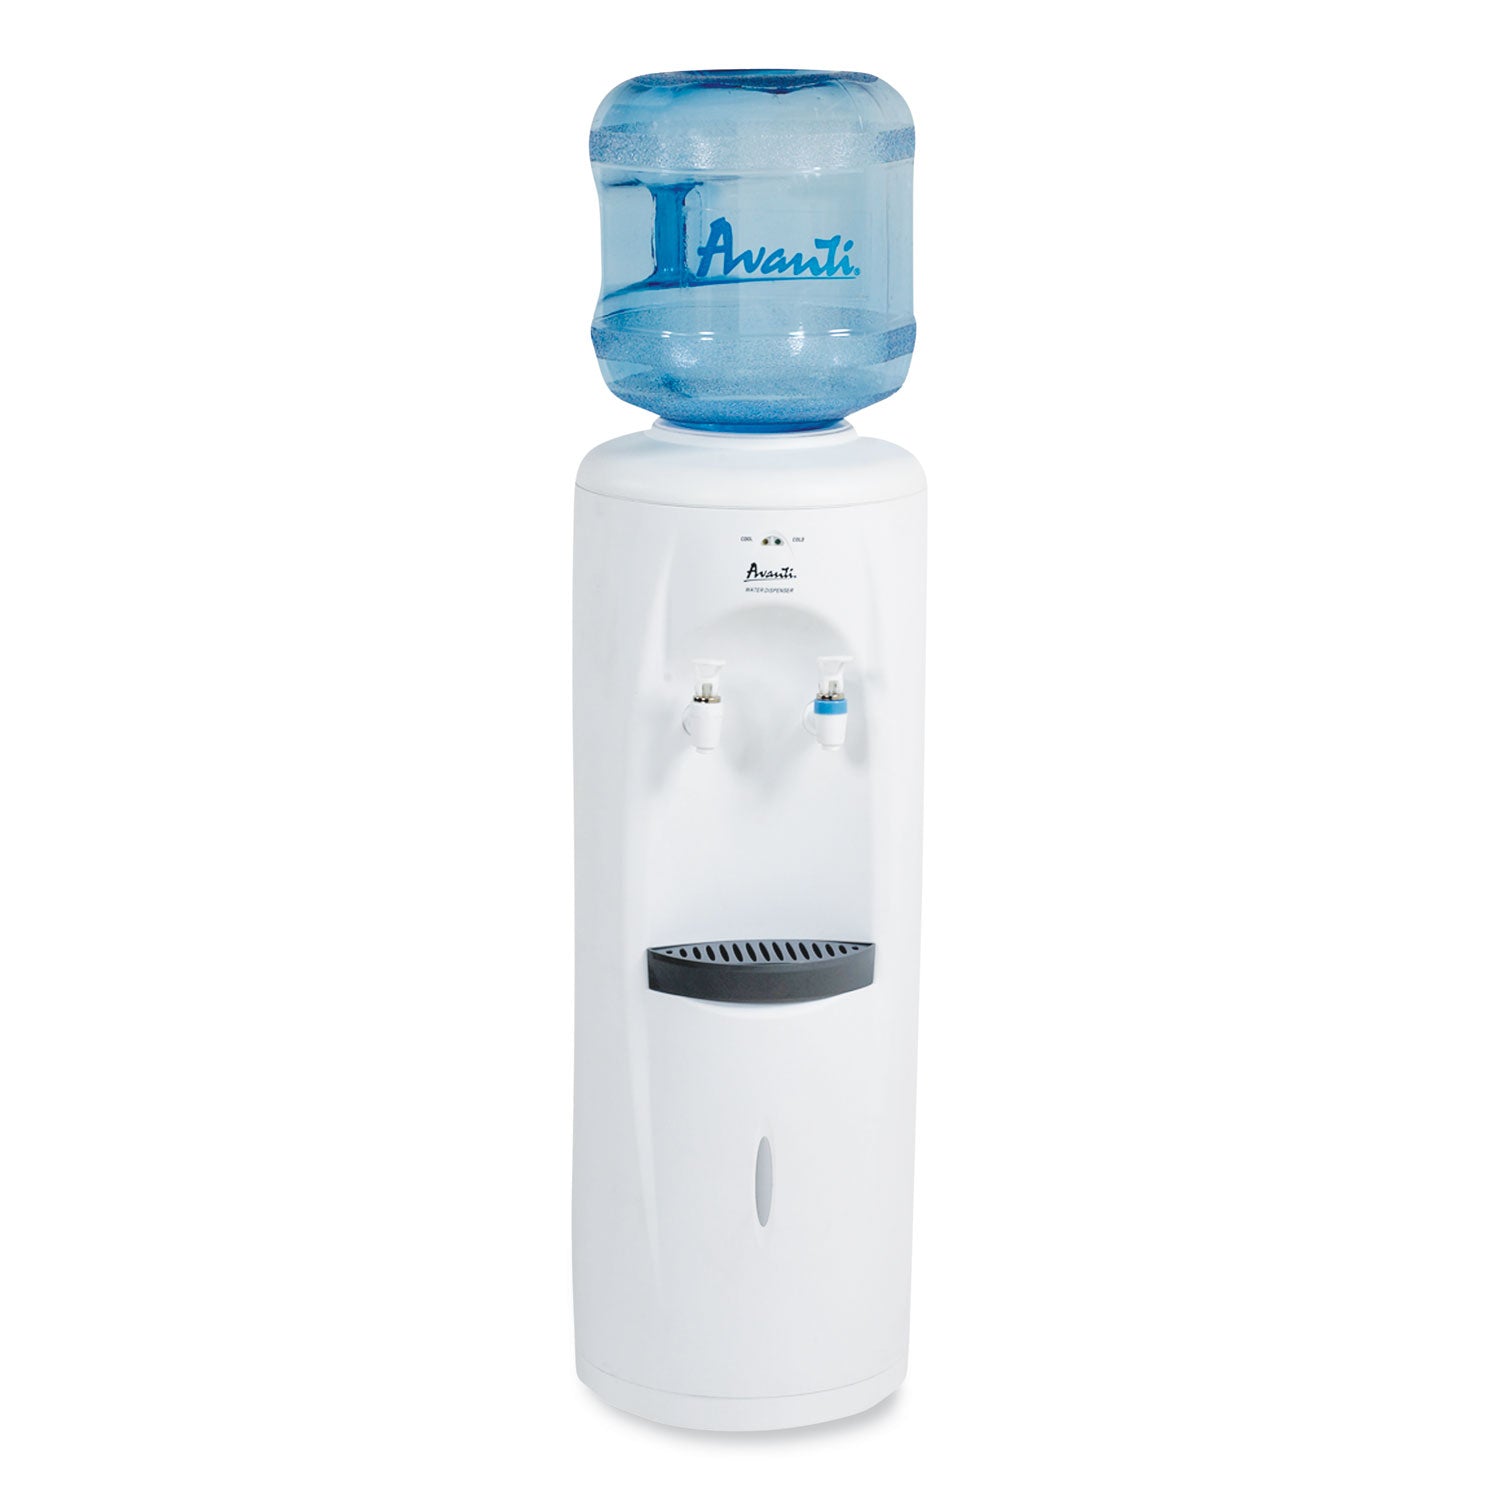 cold-and-room-temperature-water-dispenser-3-5-gal-115-x-12-5-x-34-white_avawd360 - 1